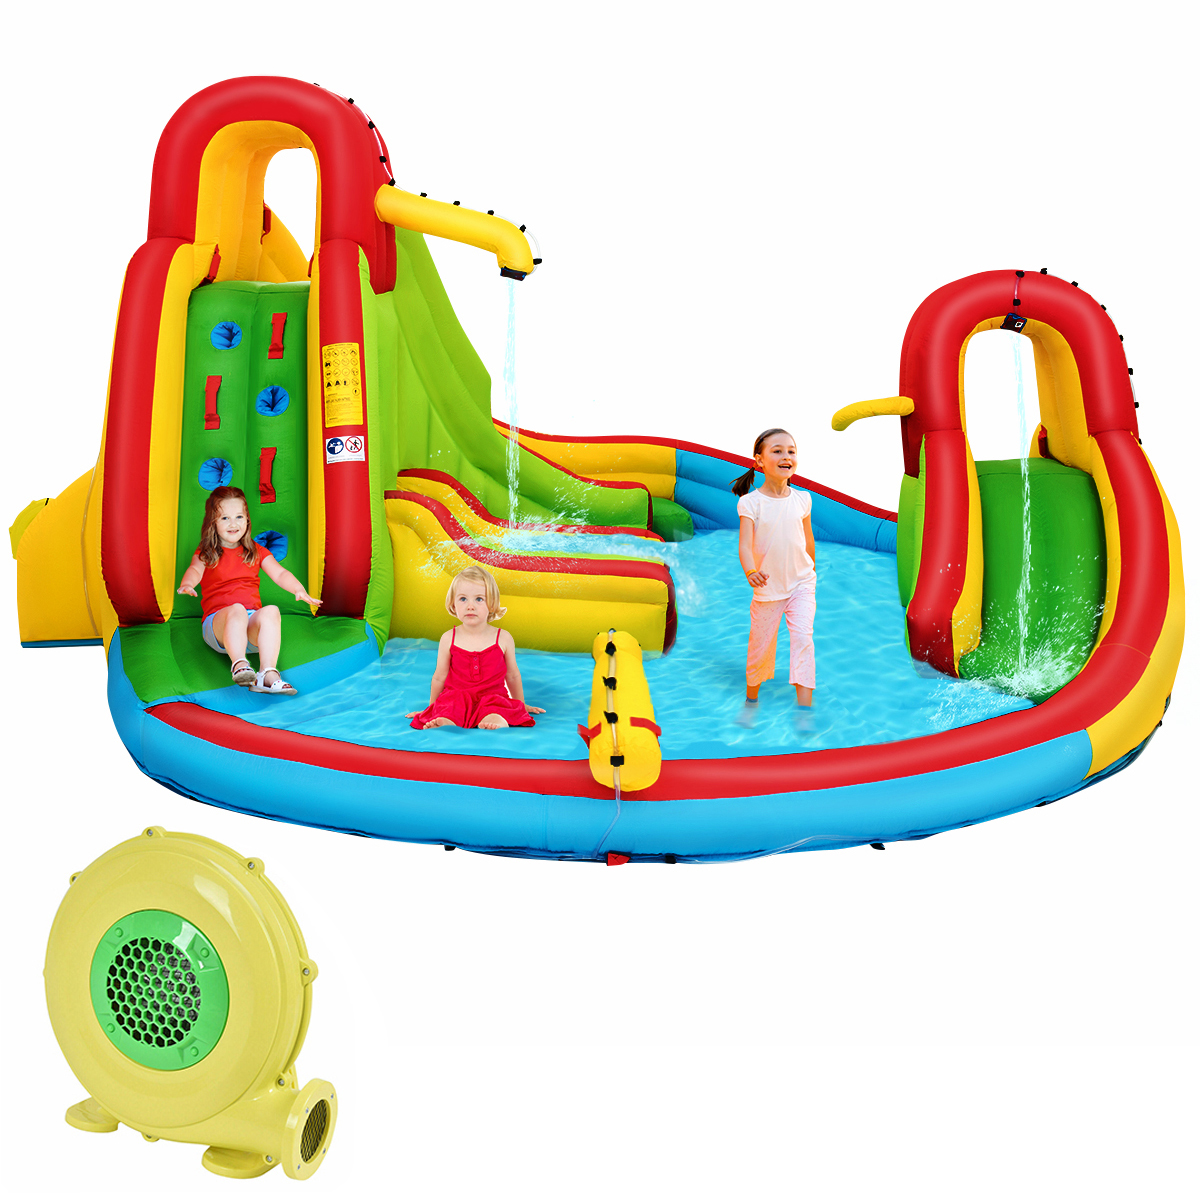 Costway Kids Inflatable Water Slide Bounce Park Splash Pool with Water Cannon & 480W Blower - image 1 of 10